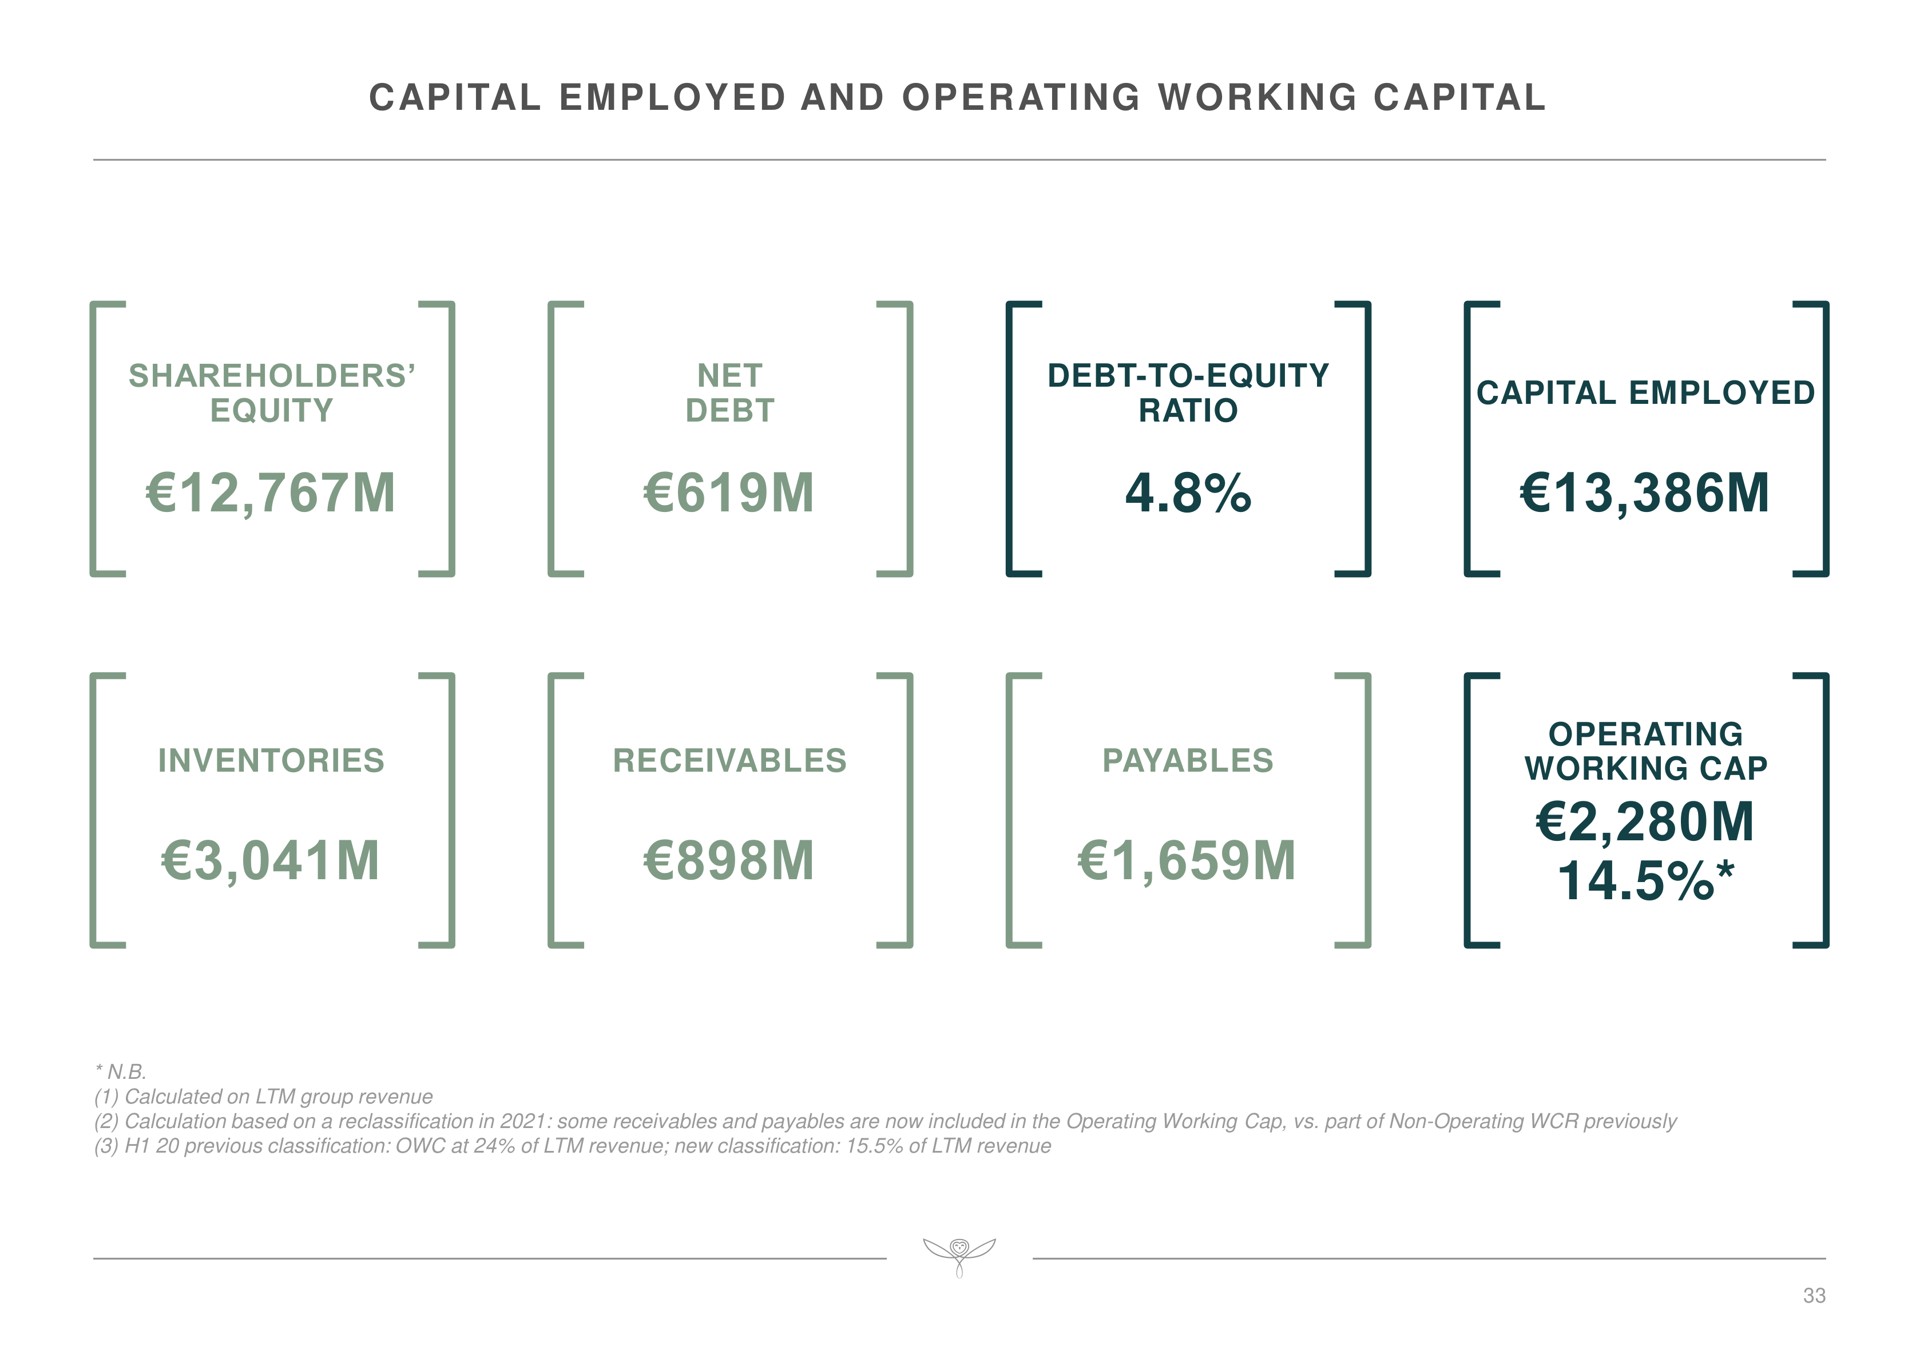 capital employed and operating working capital shareholders equity net debt debt to equity ratio capital employed inventories receivables payables operating working cap | Kering